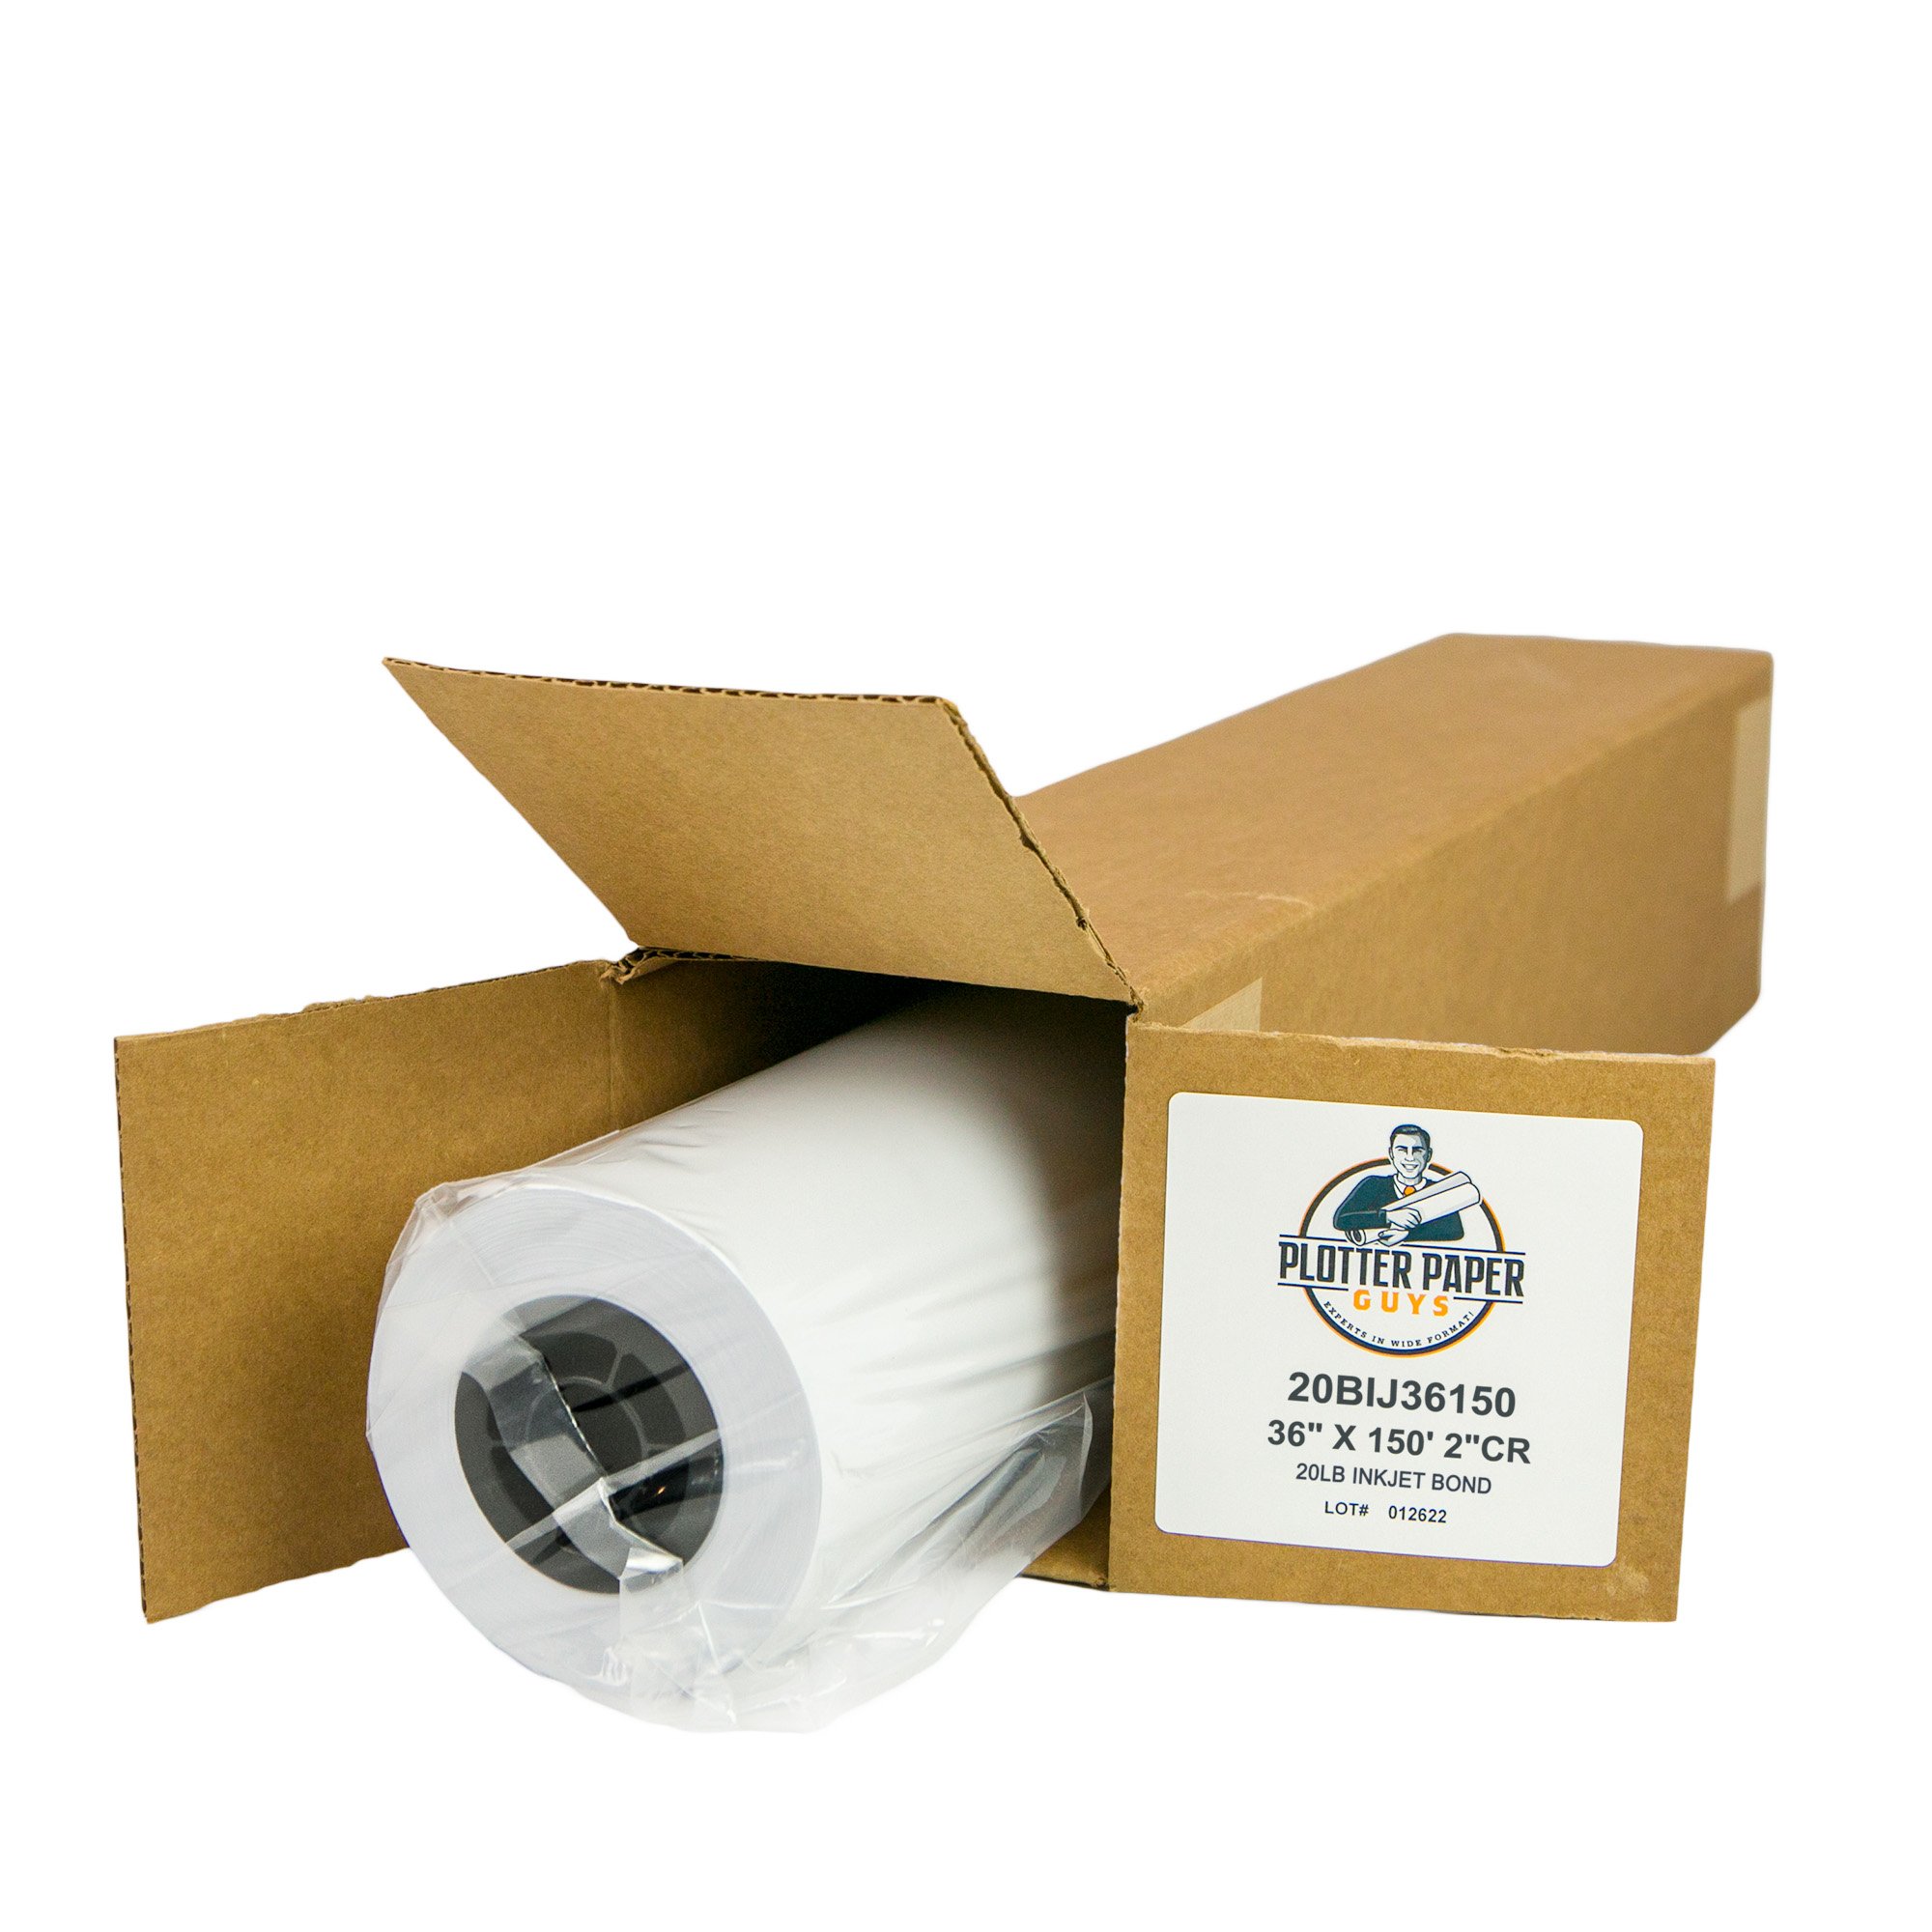 36 lb heavyweight coated bond paper roll - Bright White Paper